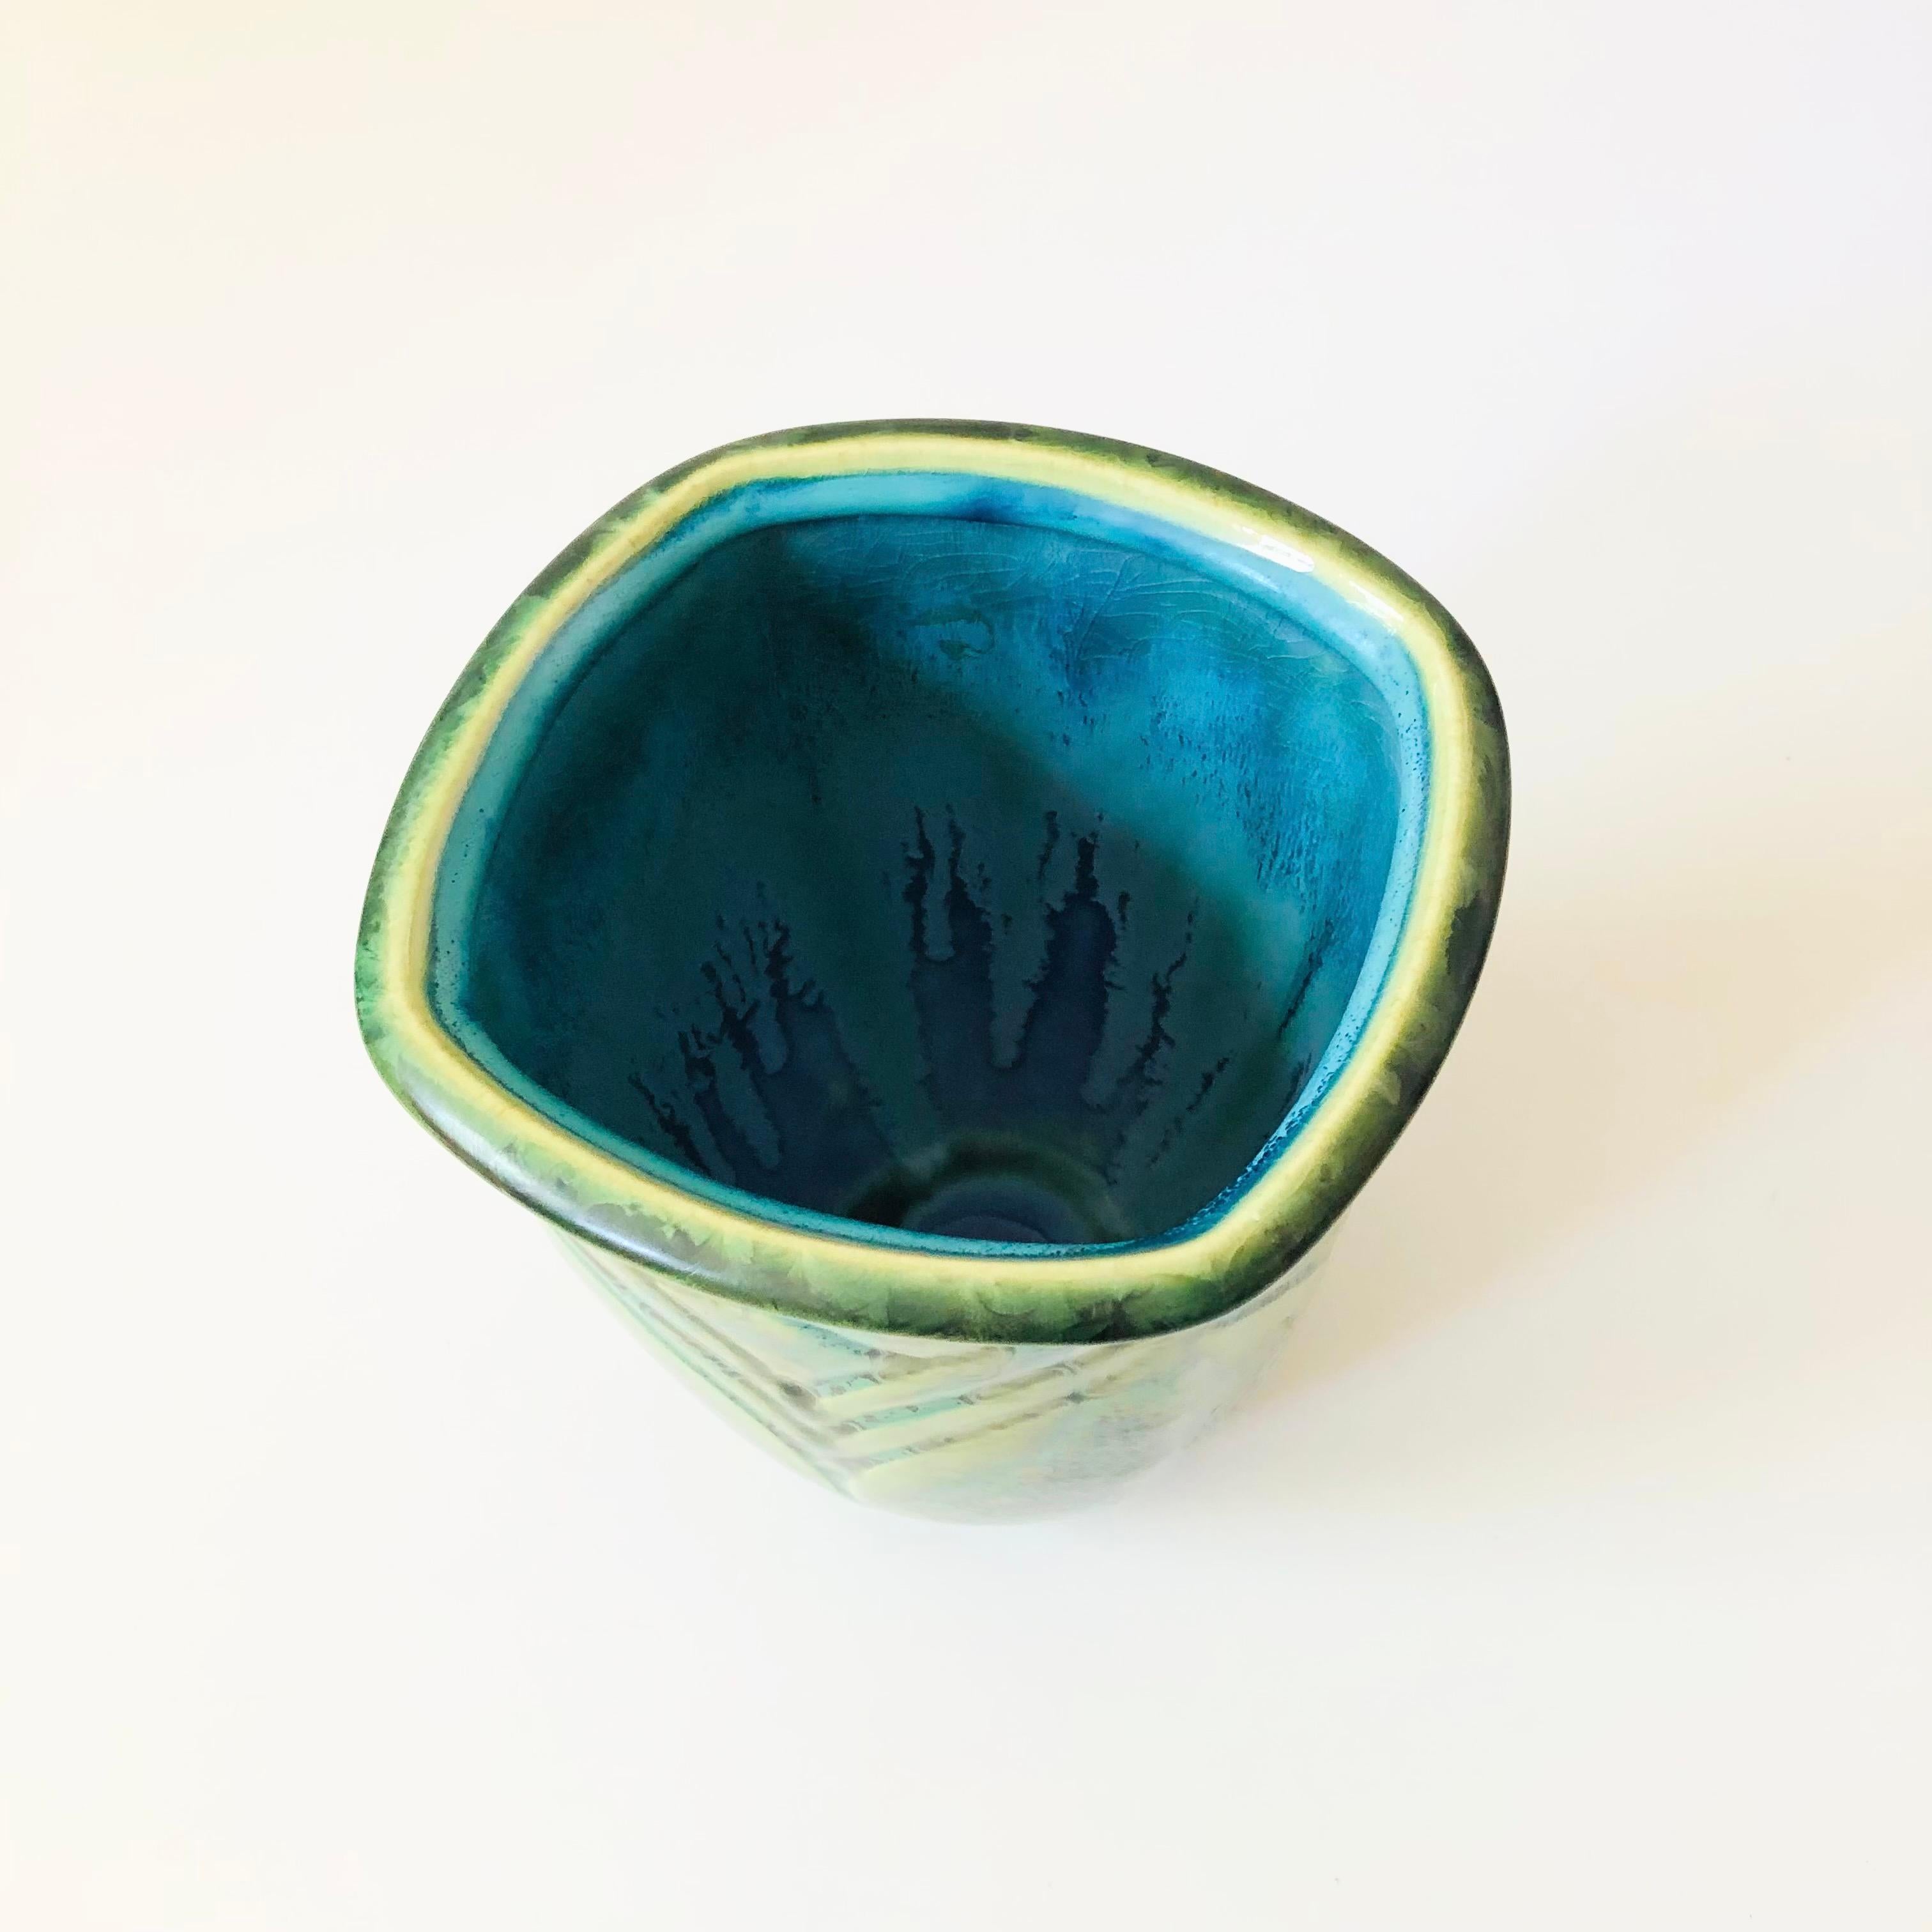 A vintage crystalline pottery vase. Green and blue colored glazes with  an organic pattern of the circular crystals created during the firing process. Unique embossed detailing to the surface. Signed on the base.

